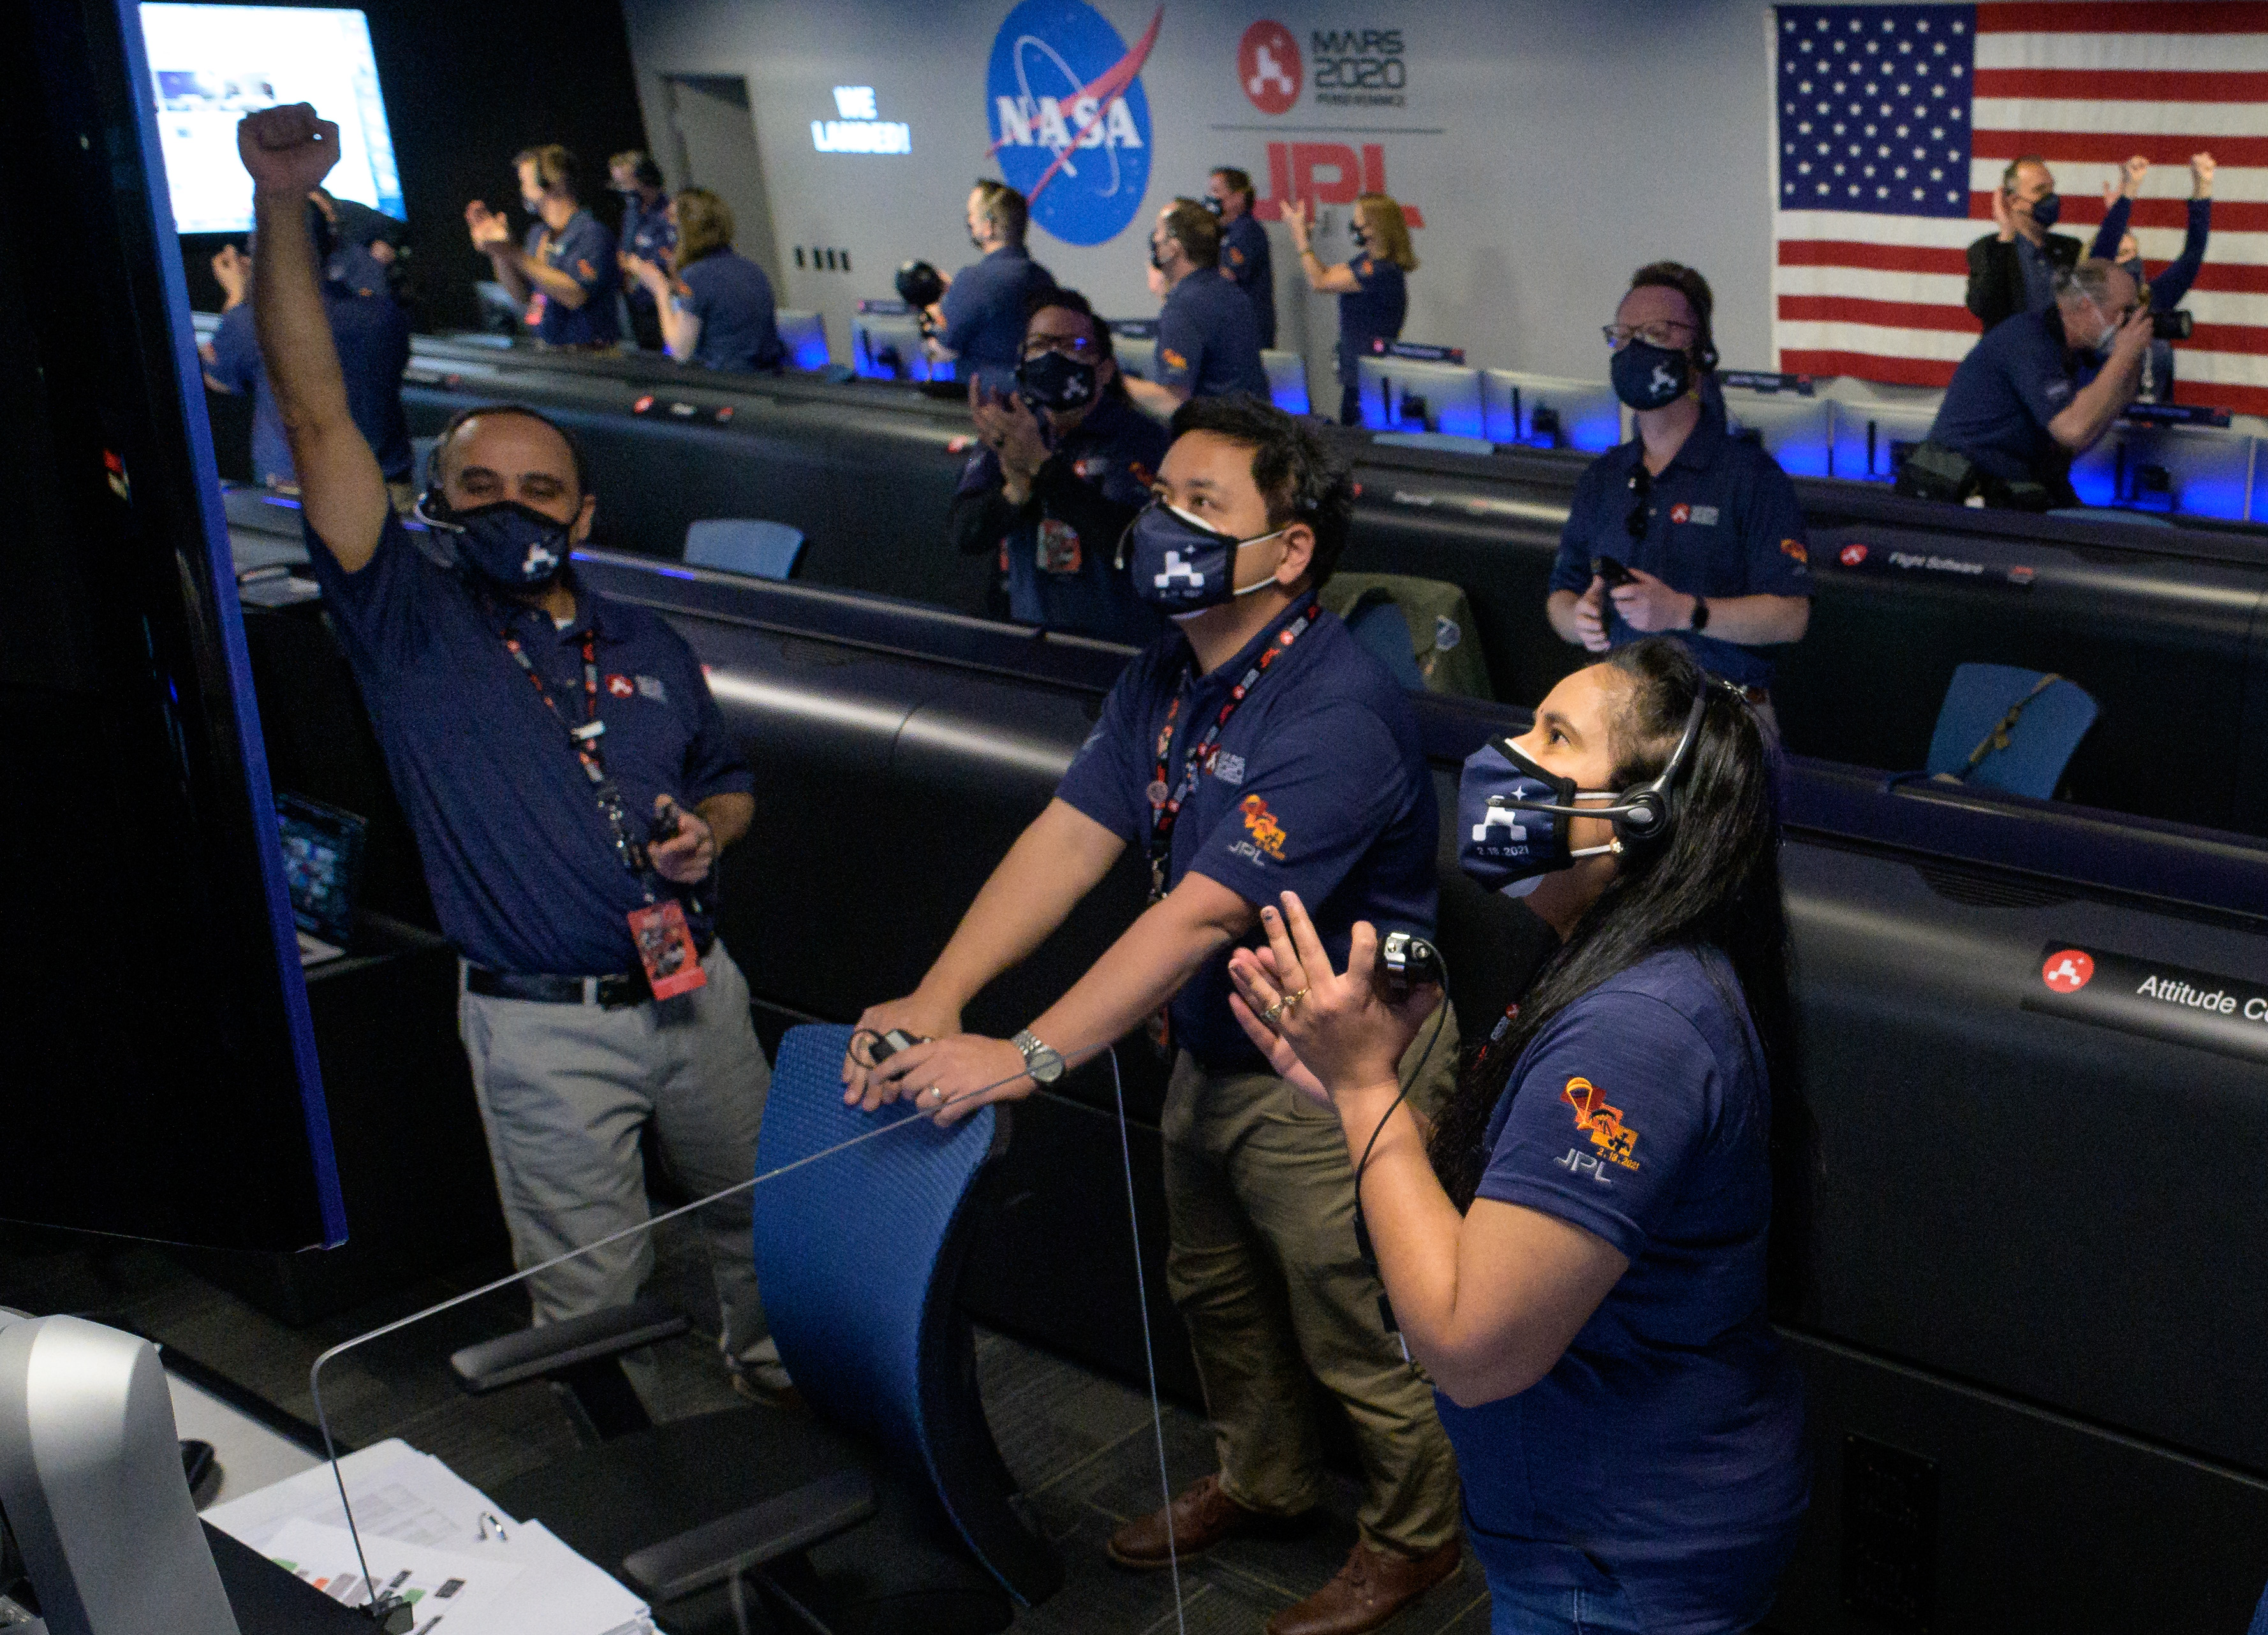 Men and women dressed in blue shirts with mission logos cheer as they watch a TV with images beamed back from Mars.